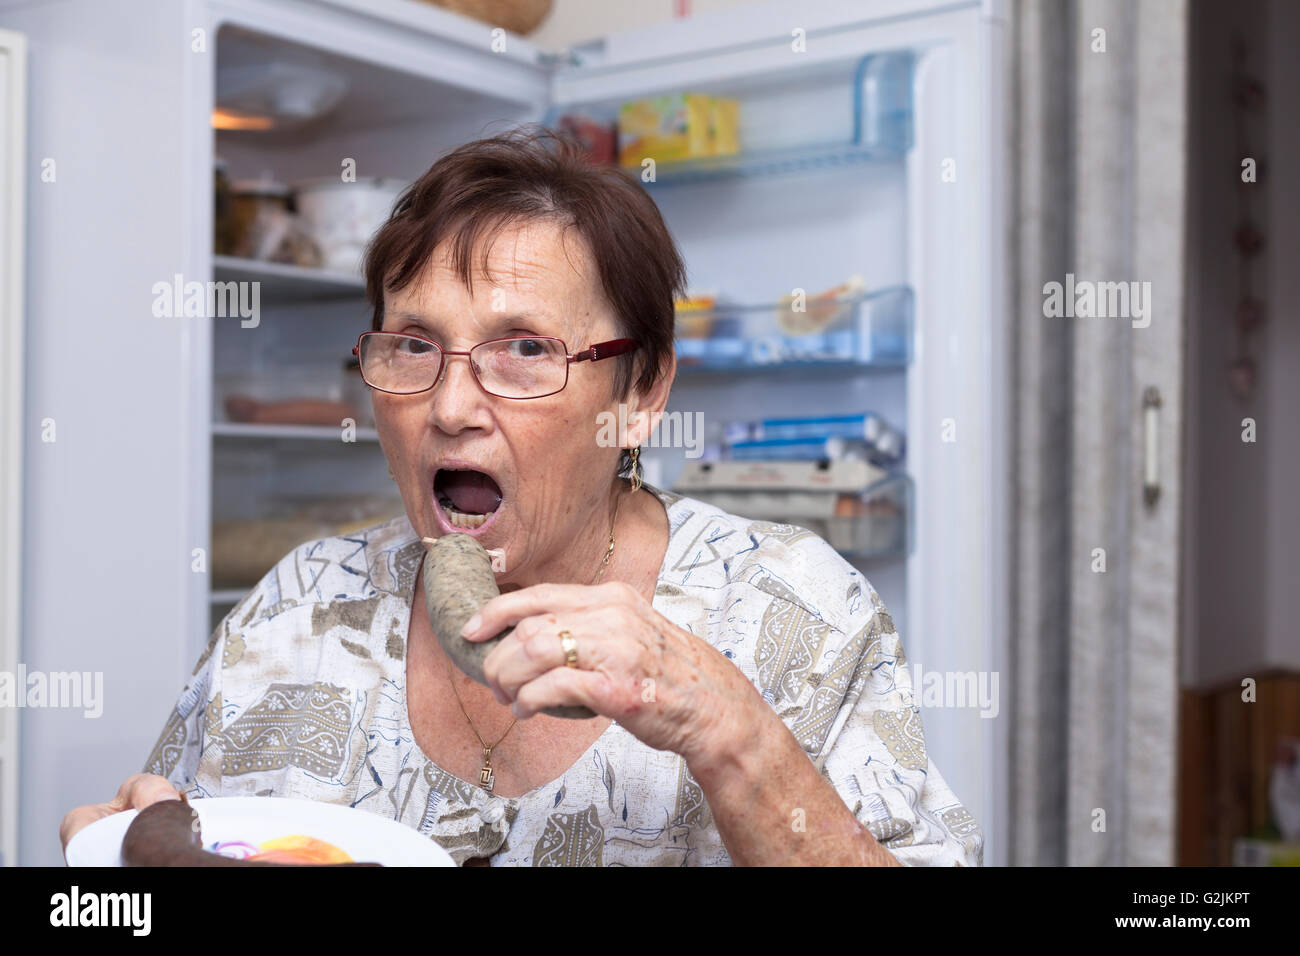 Senior woman going to eat pork liver sausage while standing in front of the open fridge in the kitchen. Stock Photo